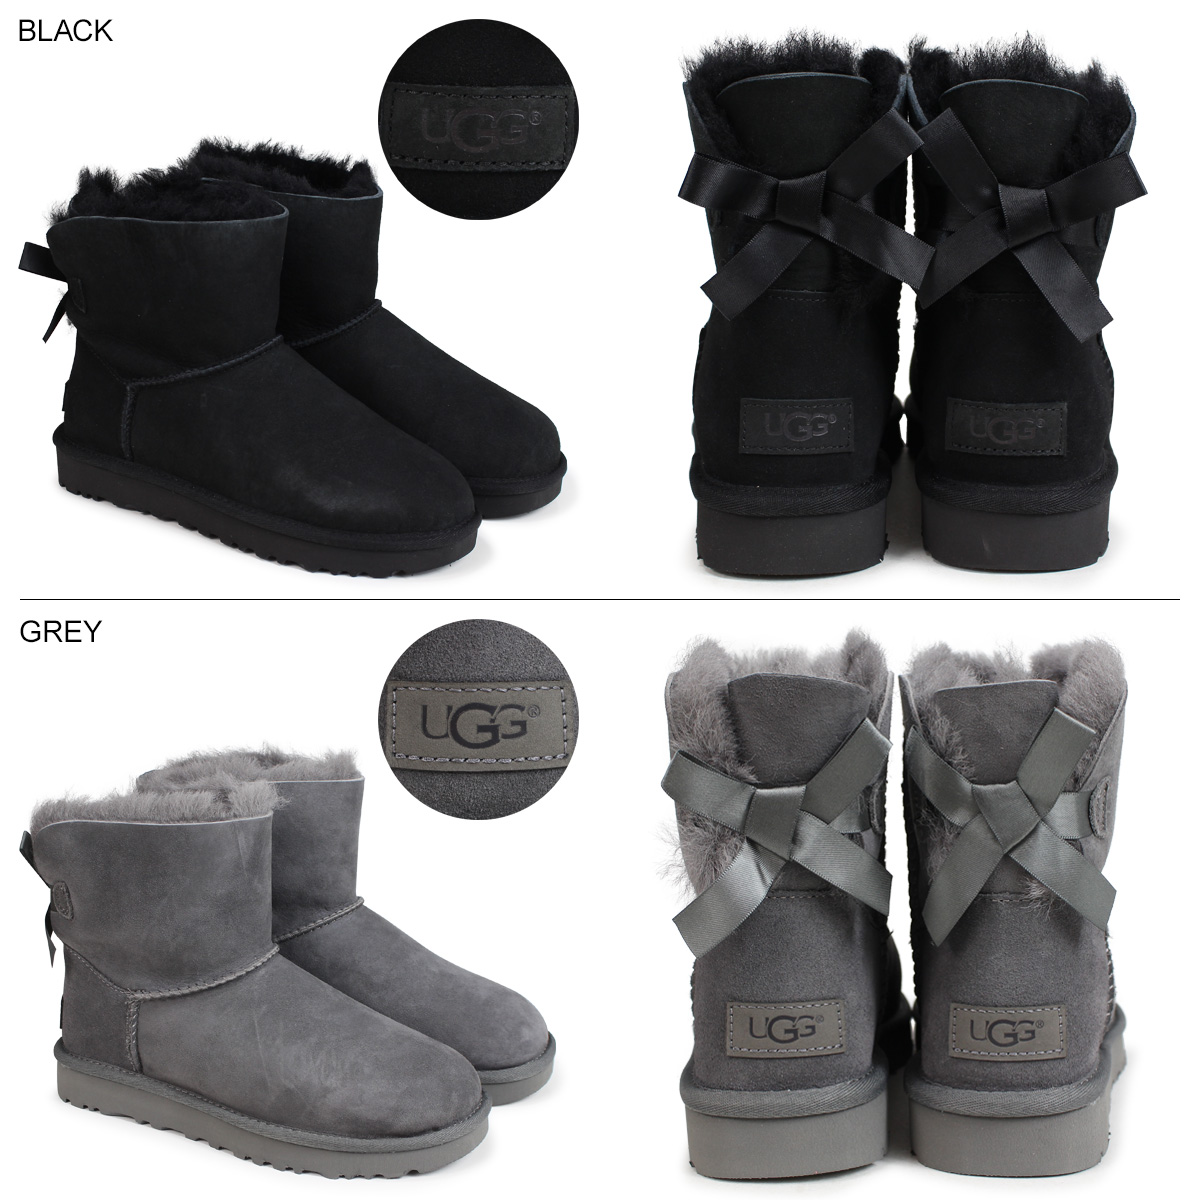 black and white uggs with bows